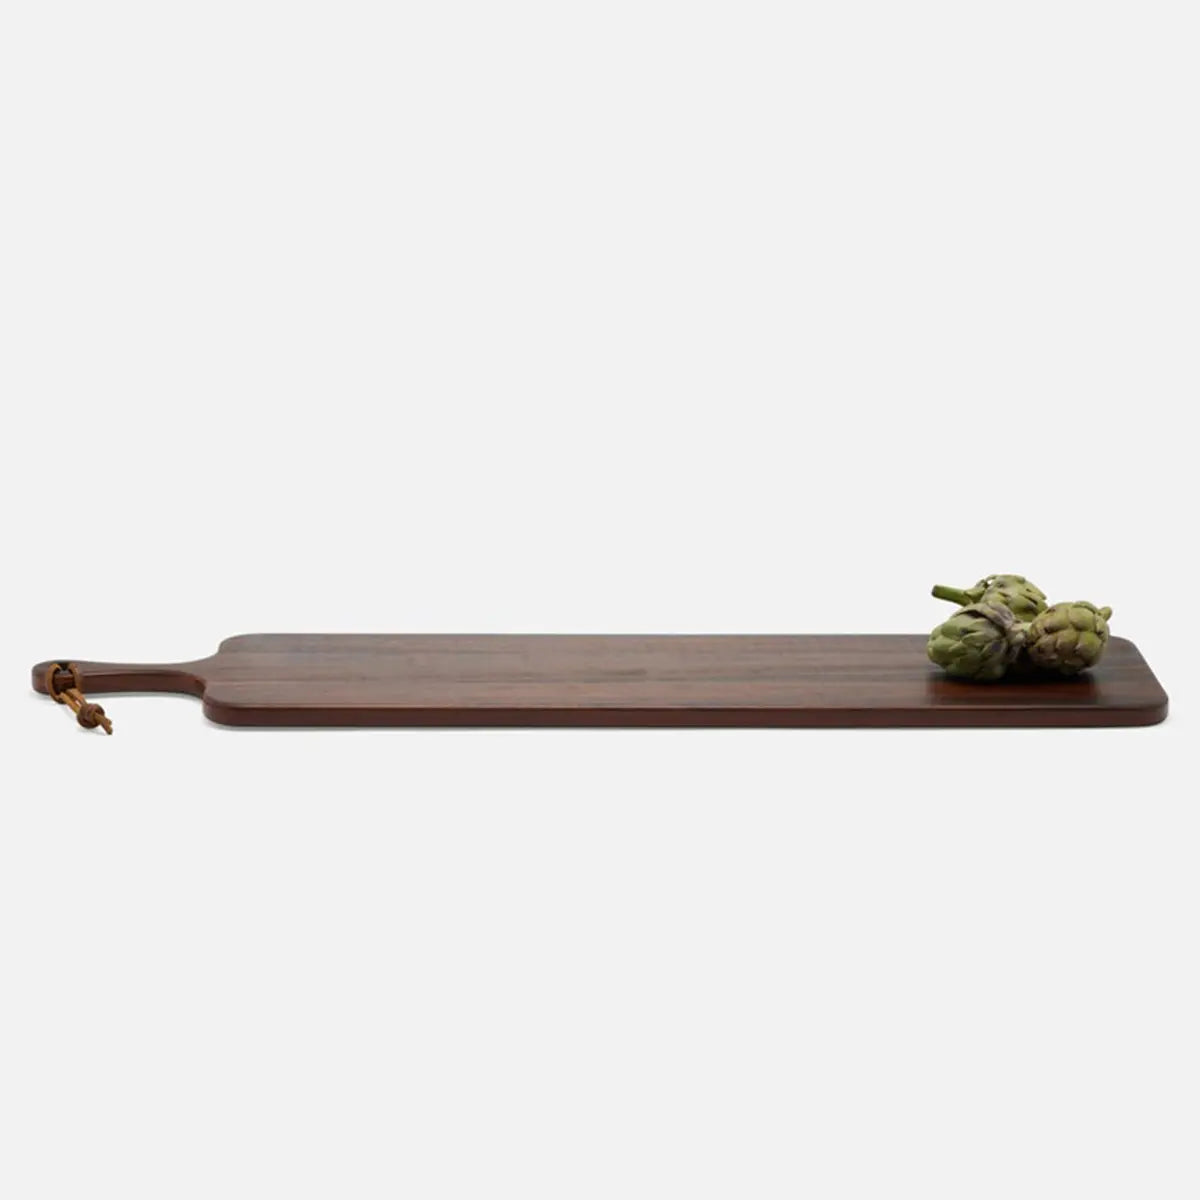 Side view of Blue Pheasant Edmund Natural Walnut Serving Board with three artichokes on top